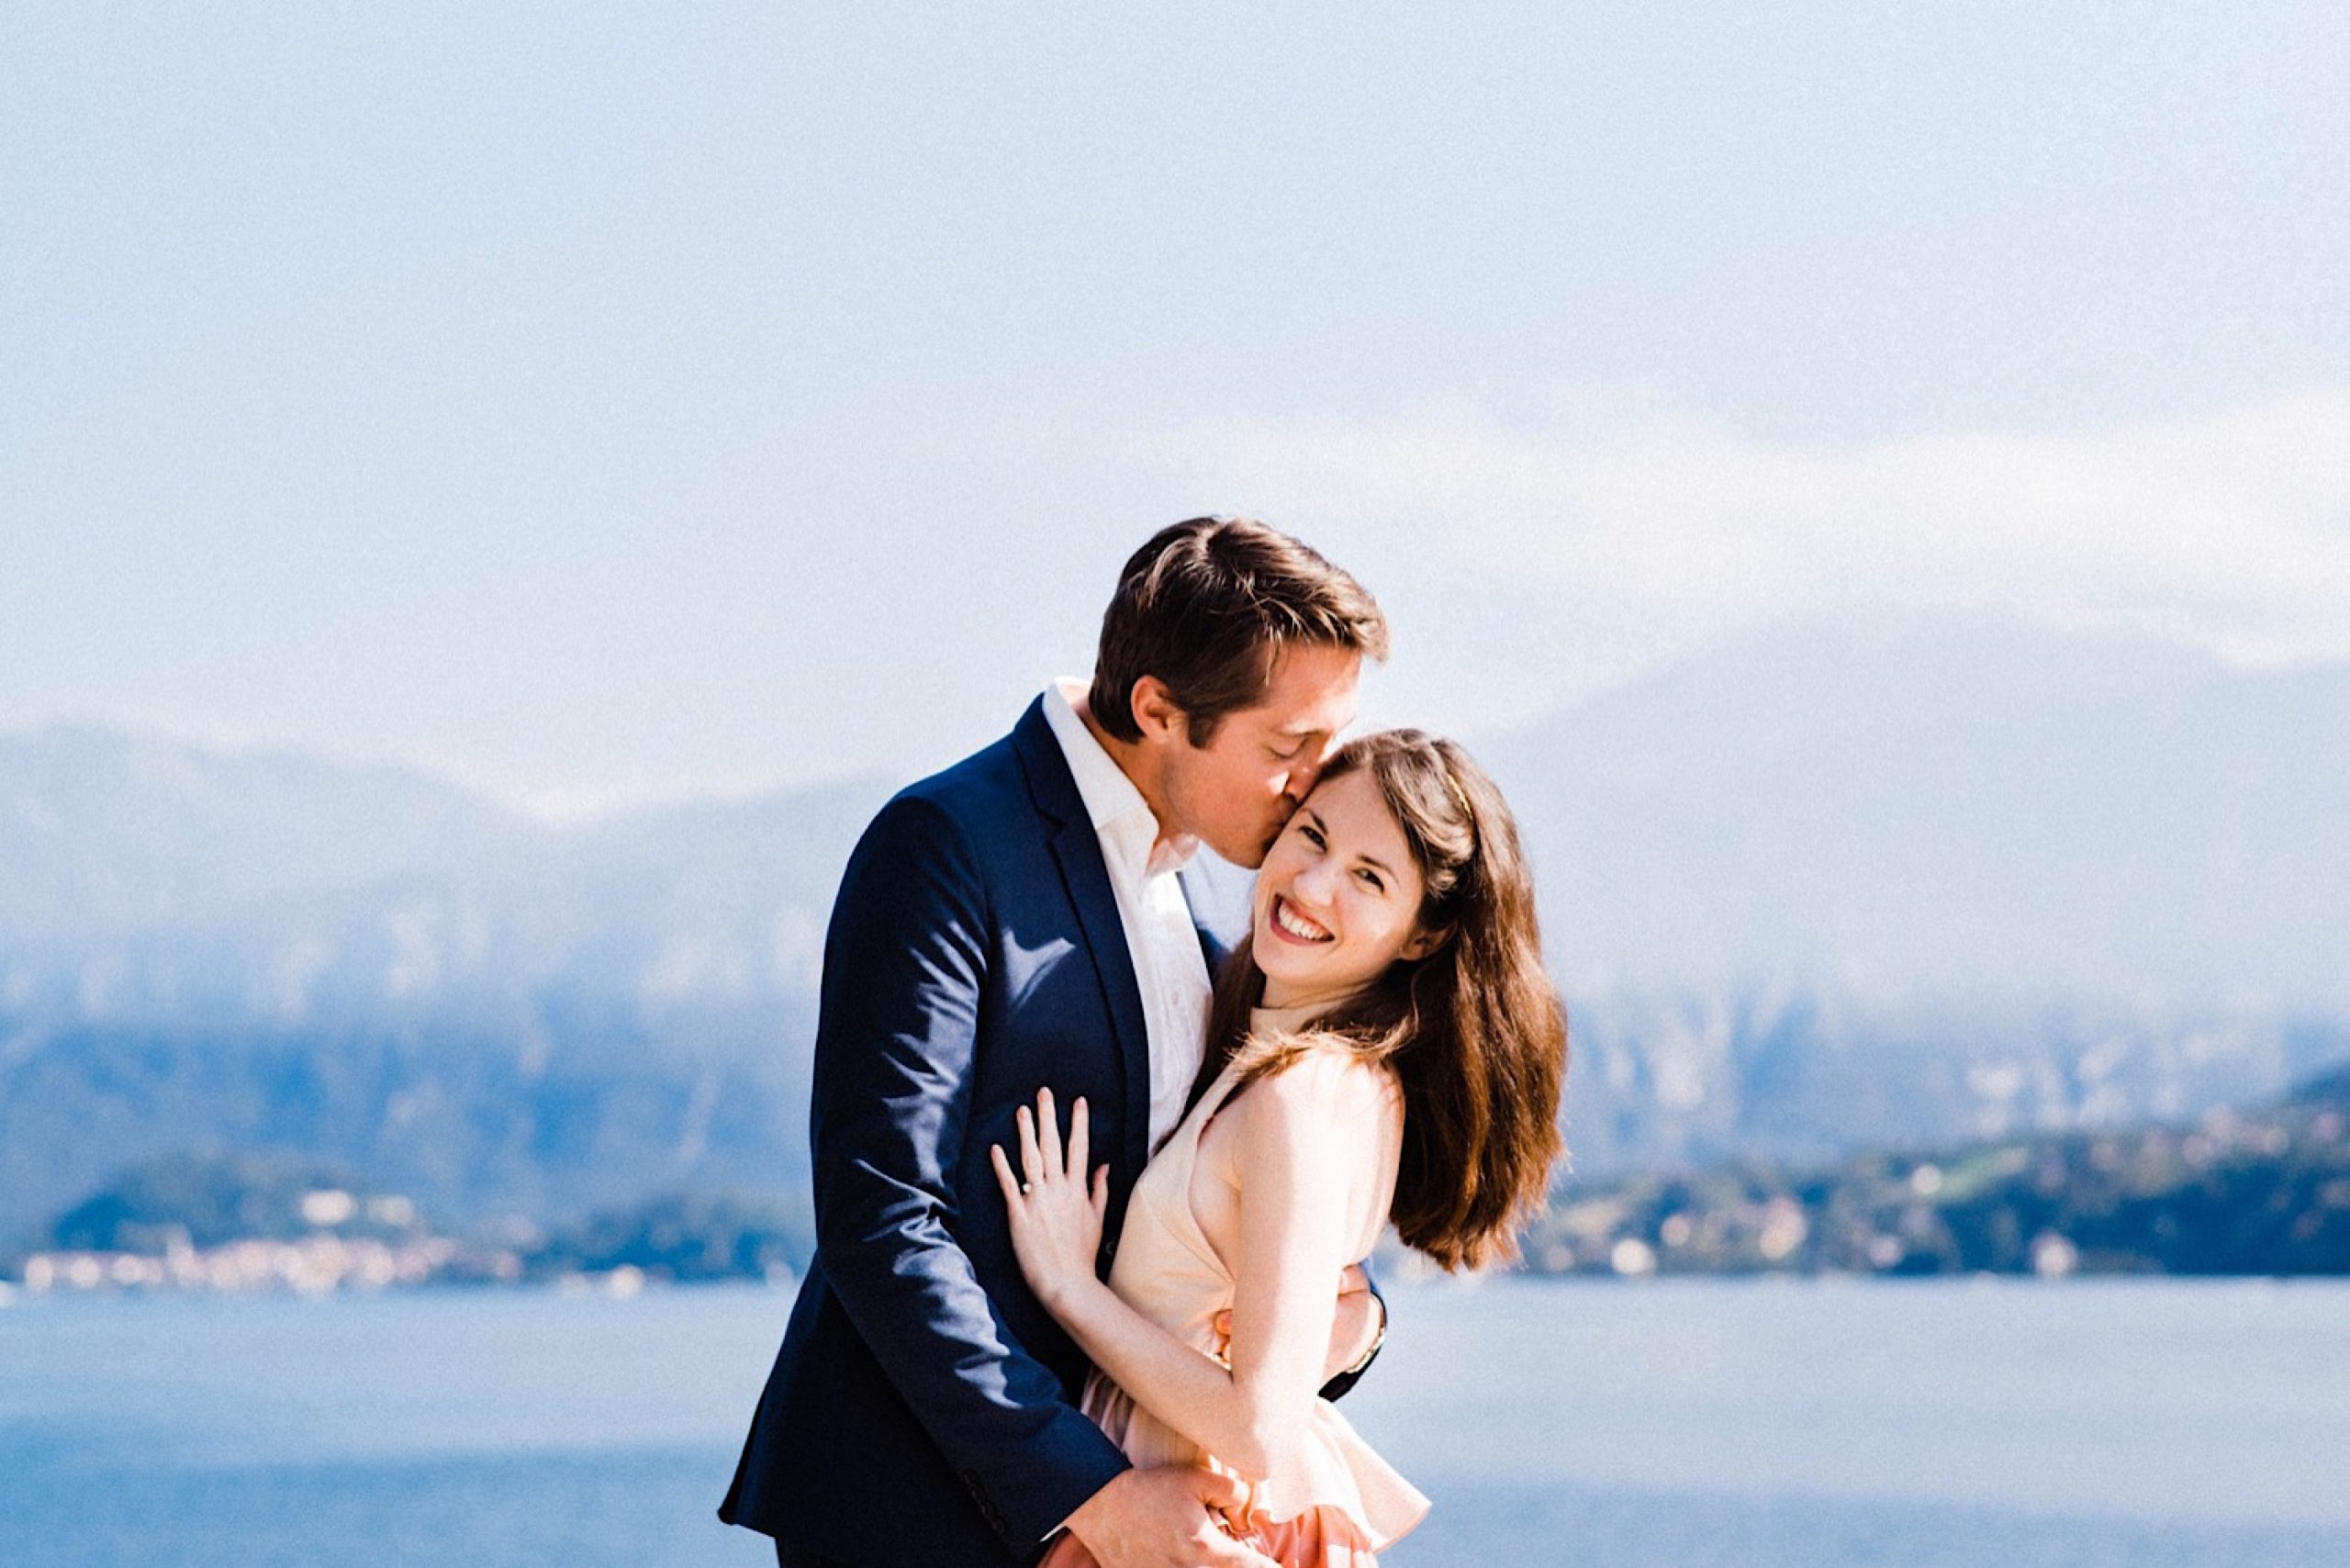 A couple stand in the middle of the frame, she smiles at the camera and he kisses her cheek. Lake Como and its surrounding mountains are in the background.